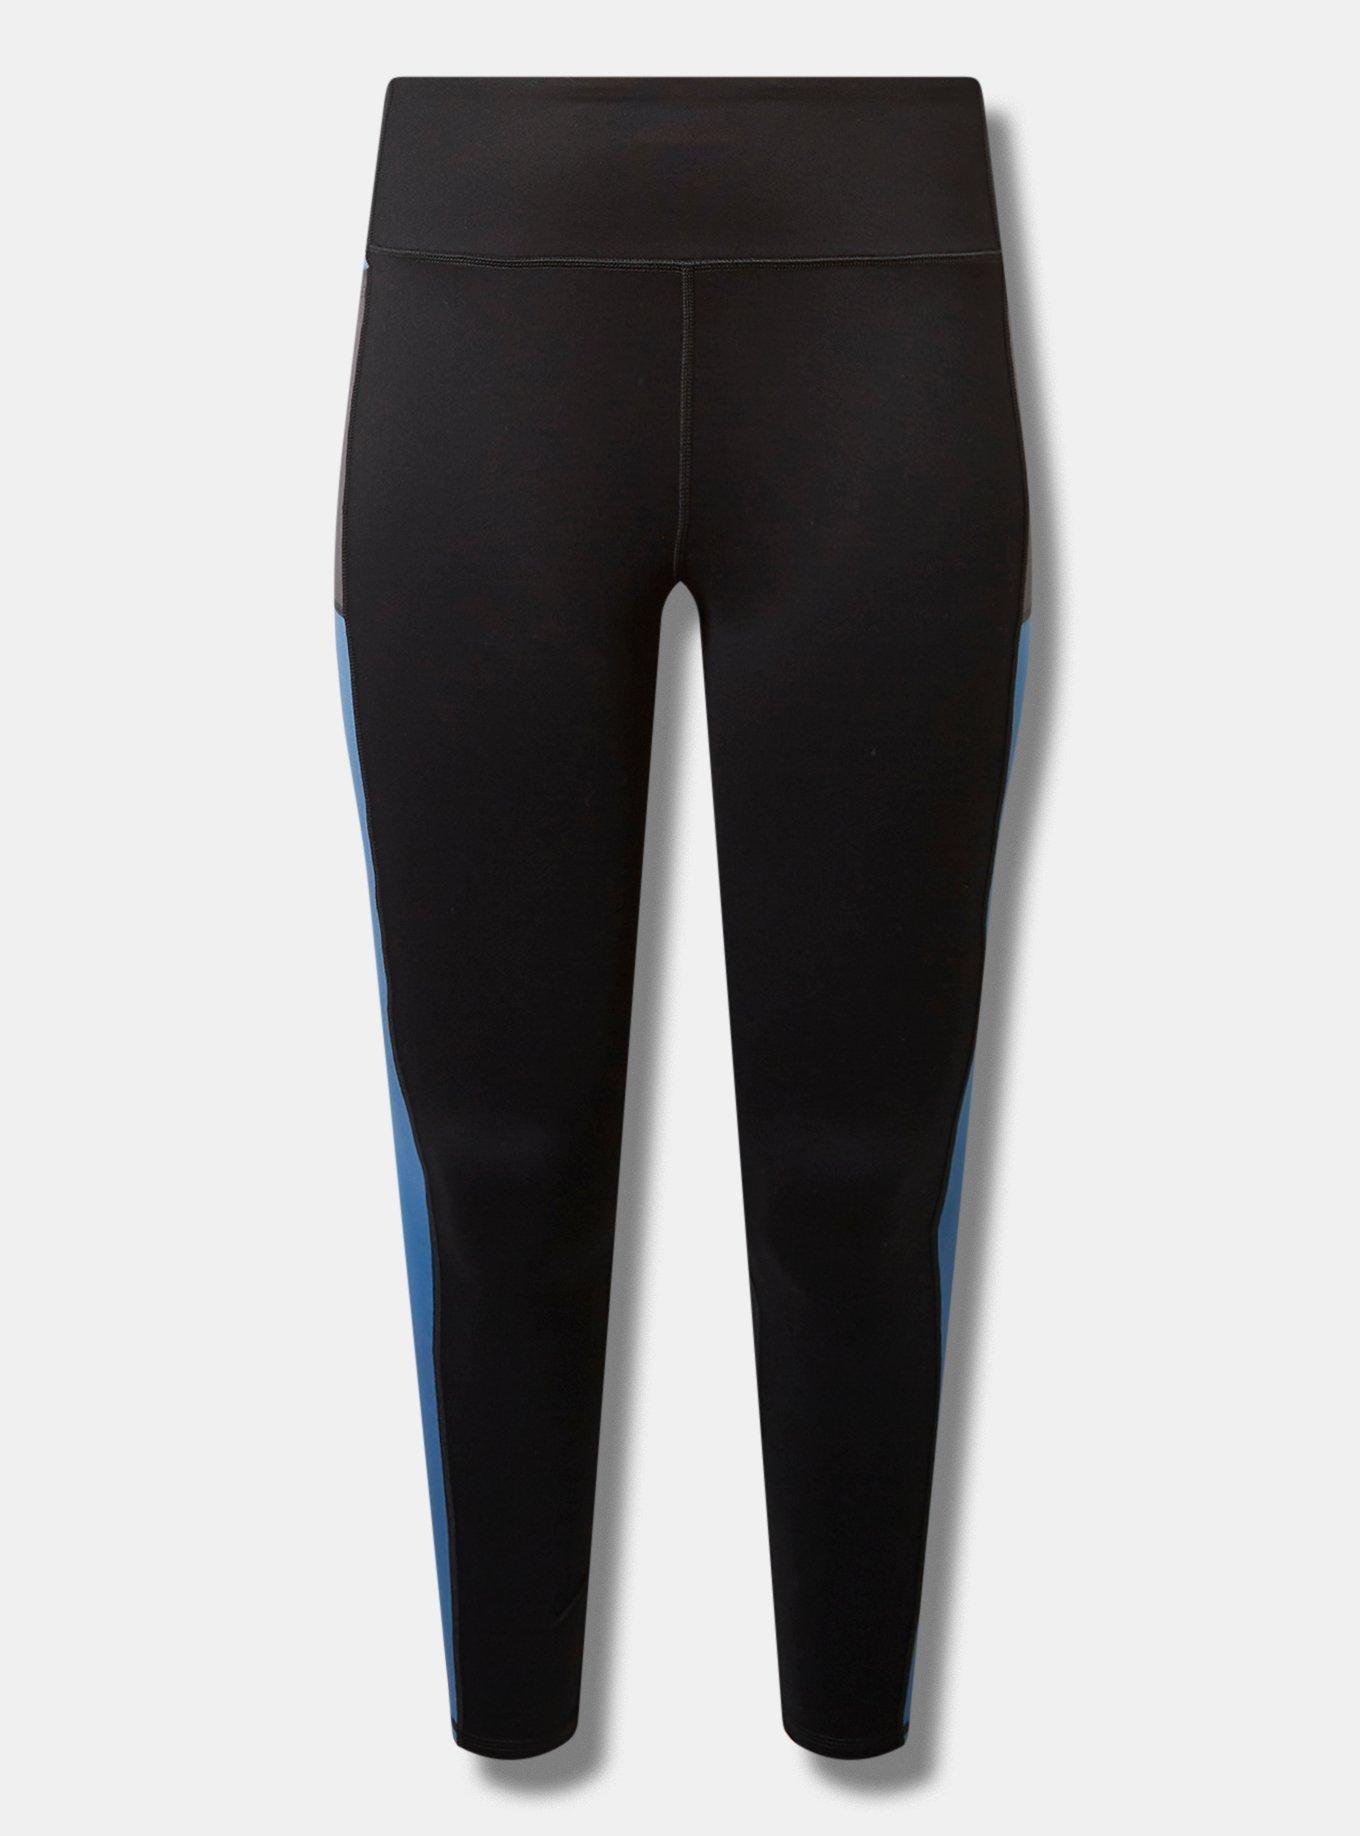 Torrid 3 (3x) PERFORMANCE CORE FULL LENGTH ACTIVE LEGGING WITH SIDE POCKETS  Nwts – St. John's Institute (Hua Ming)